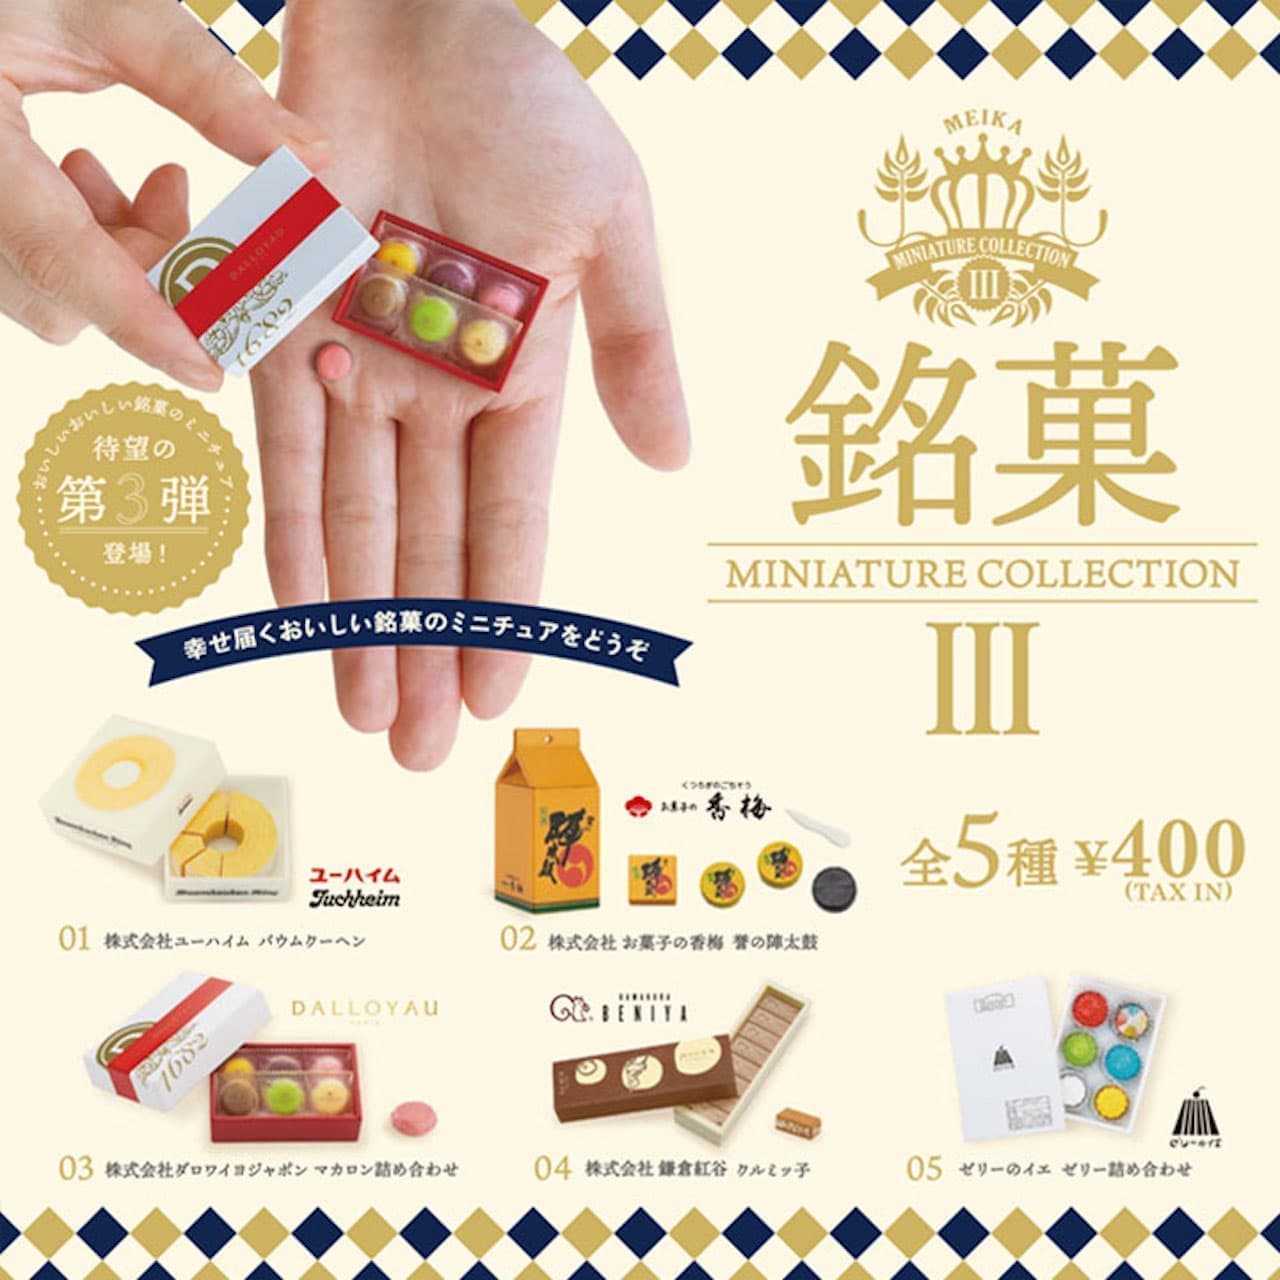 Famous Confectionery Miniature Collection Vol. 3" from Ken Elephant